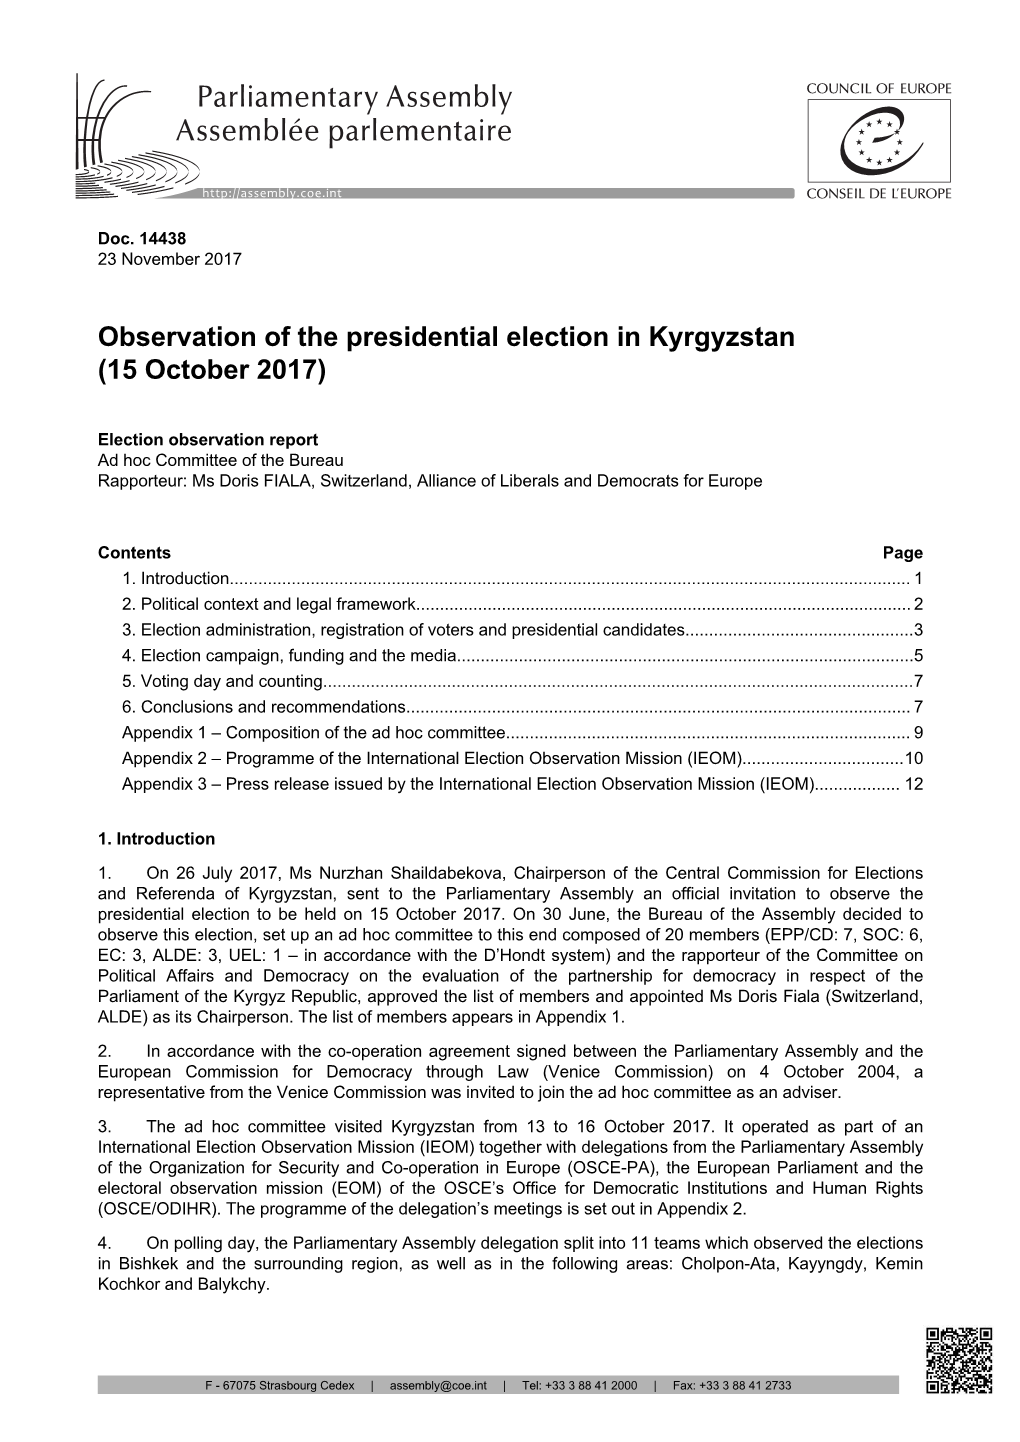 Observation of the Presidential Election in Kyrgyzstan (15 October 2017)